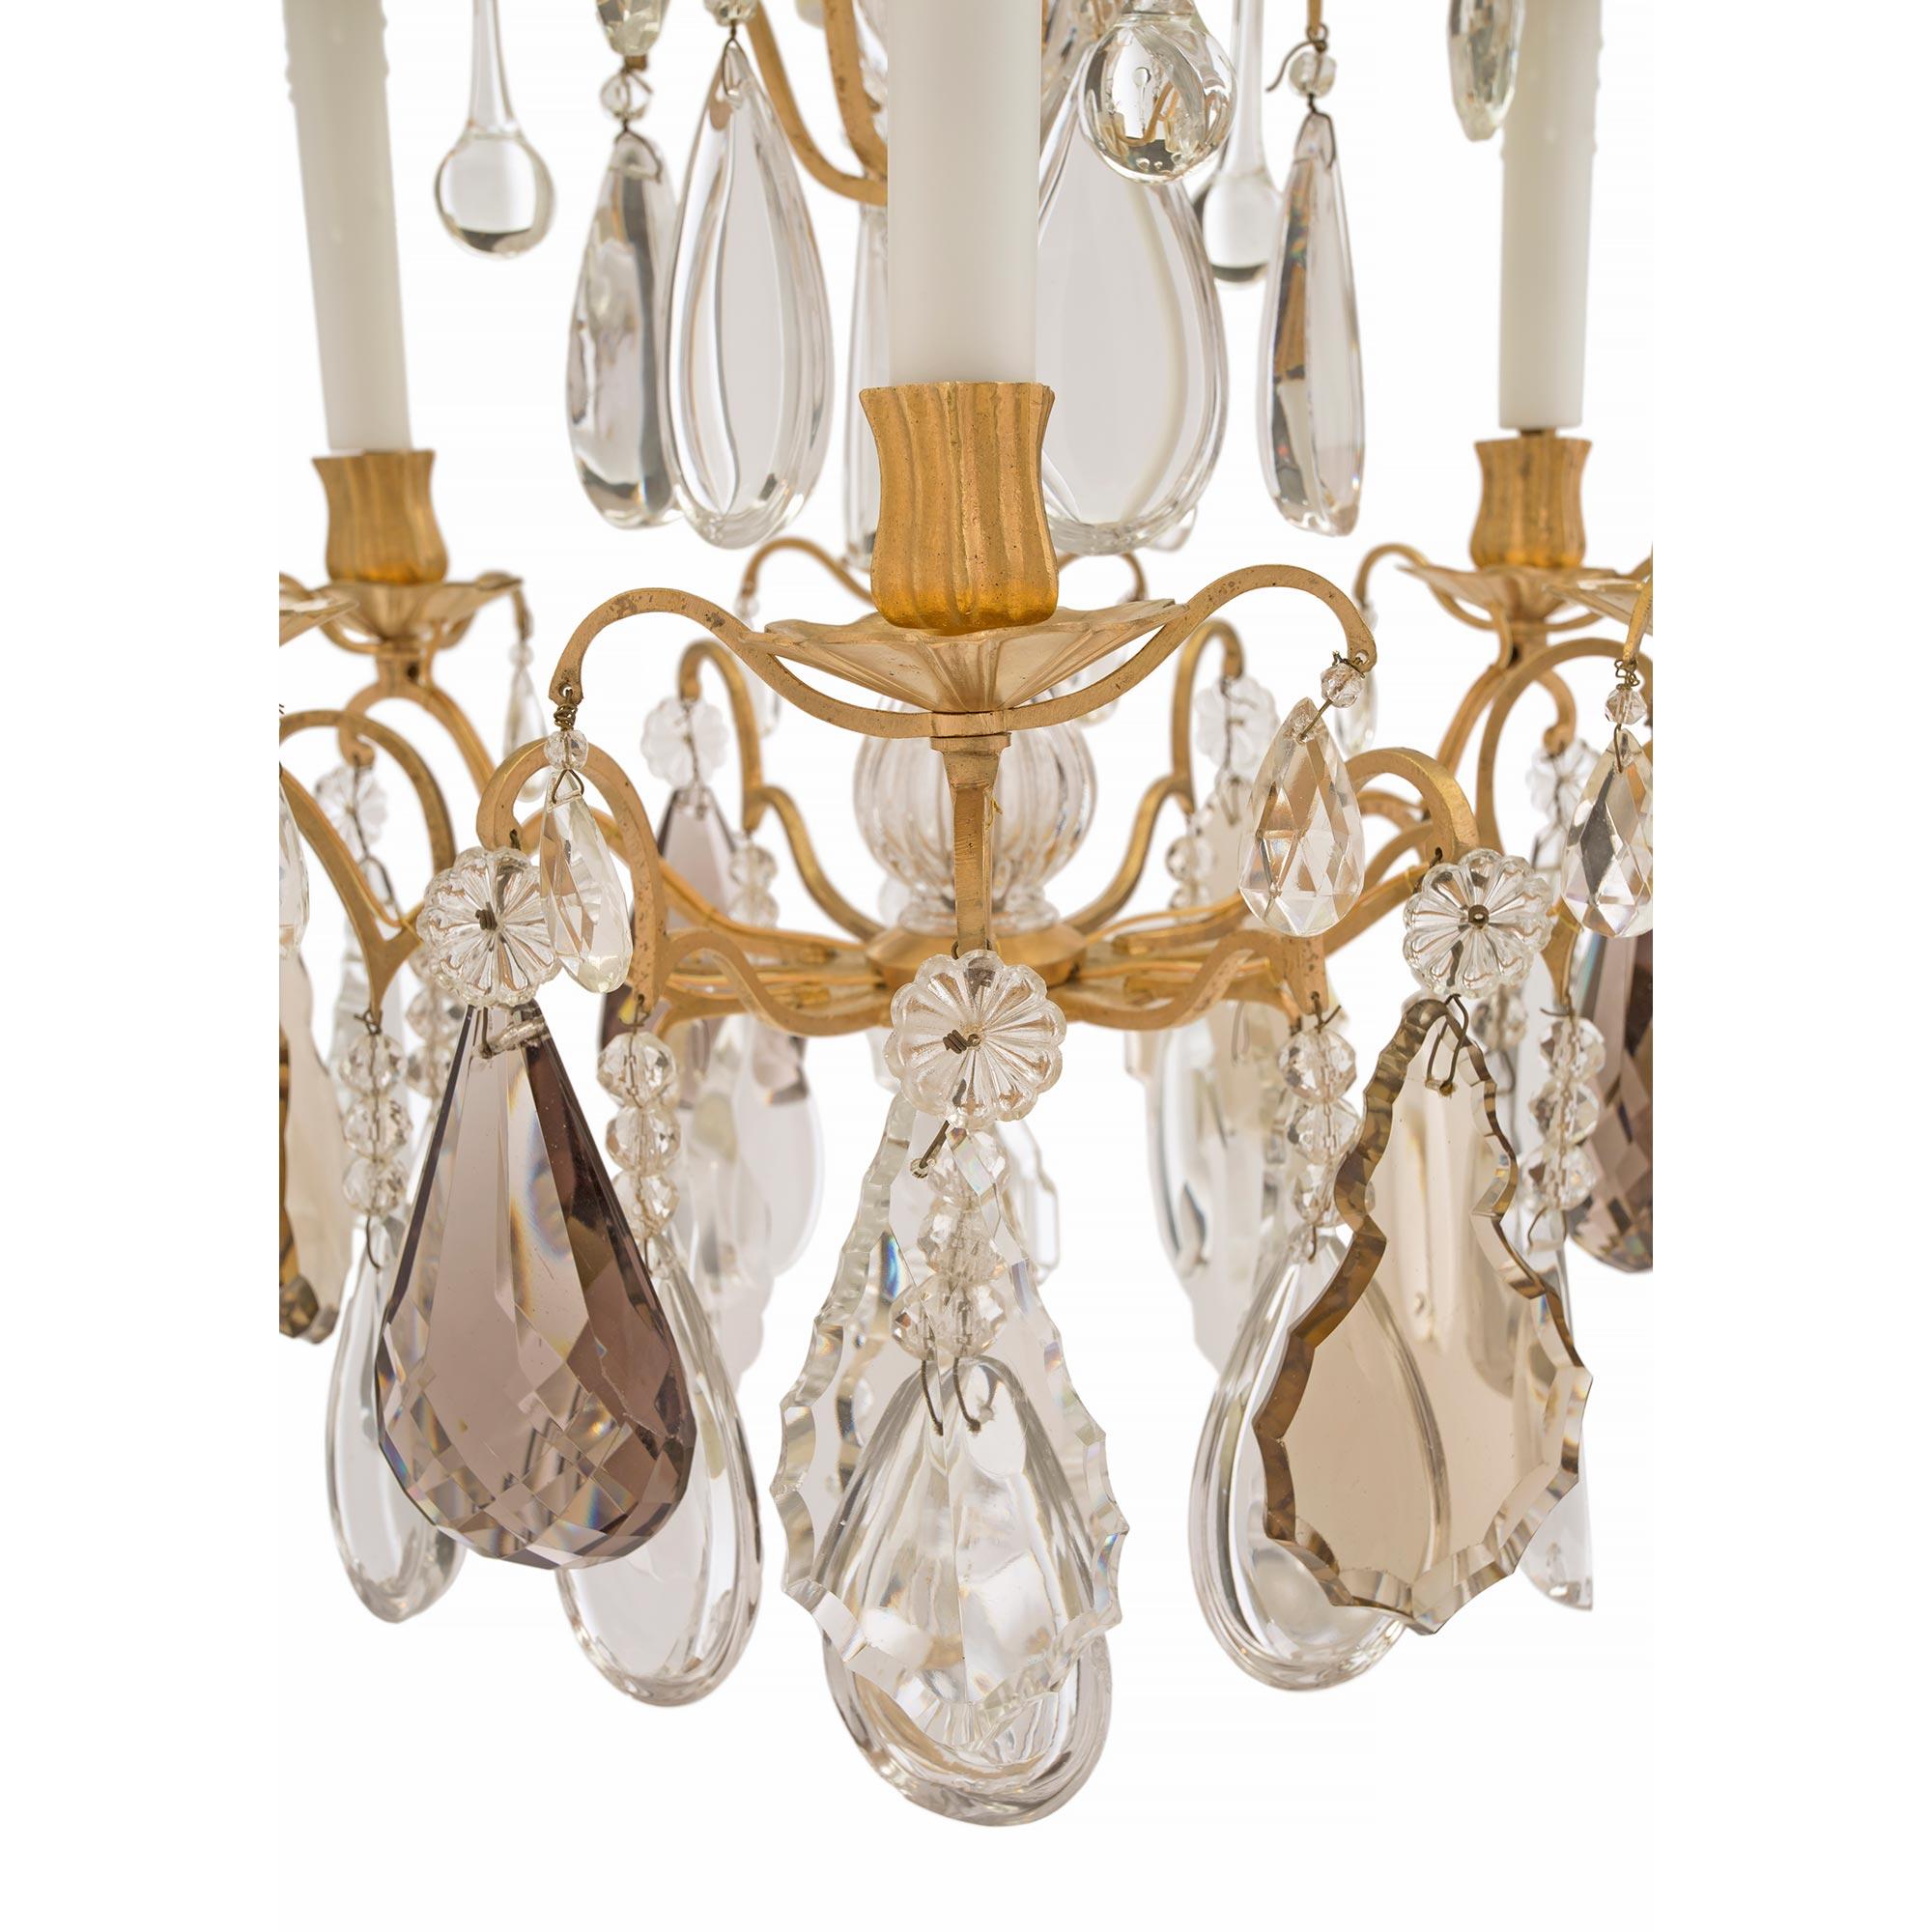 French Mid-19th Century Louis XV Style Baccarat Crystal and Ormolu Chandelier For Sale 1